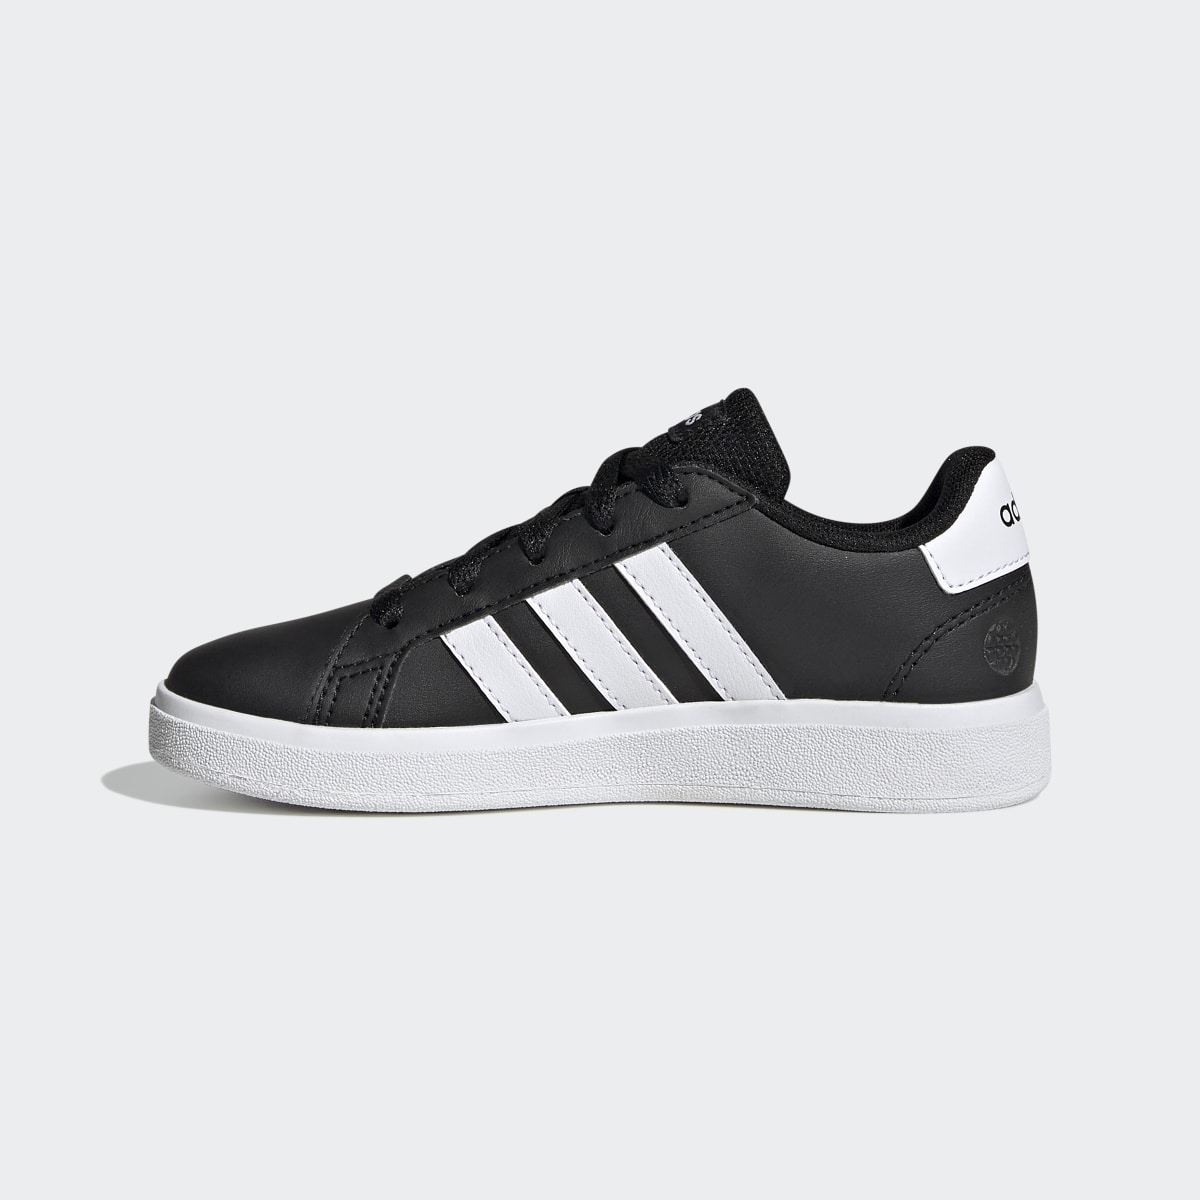 Adidas Grand Court Lifestyle Tennis Lace-Up Shoes. 7